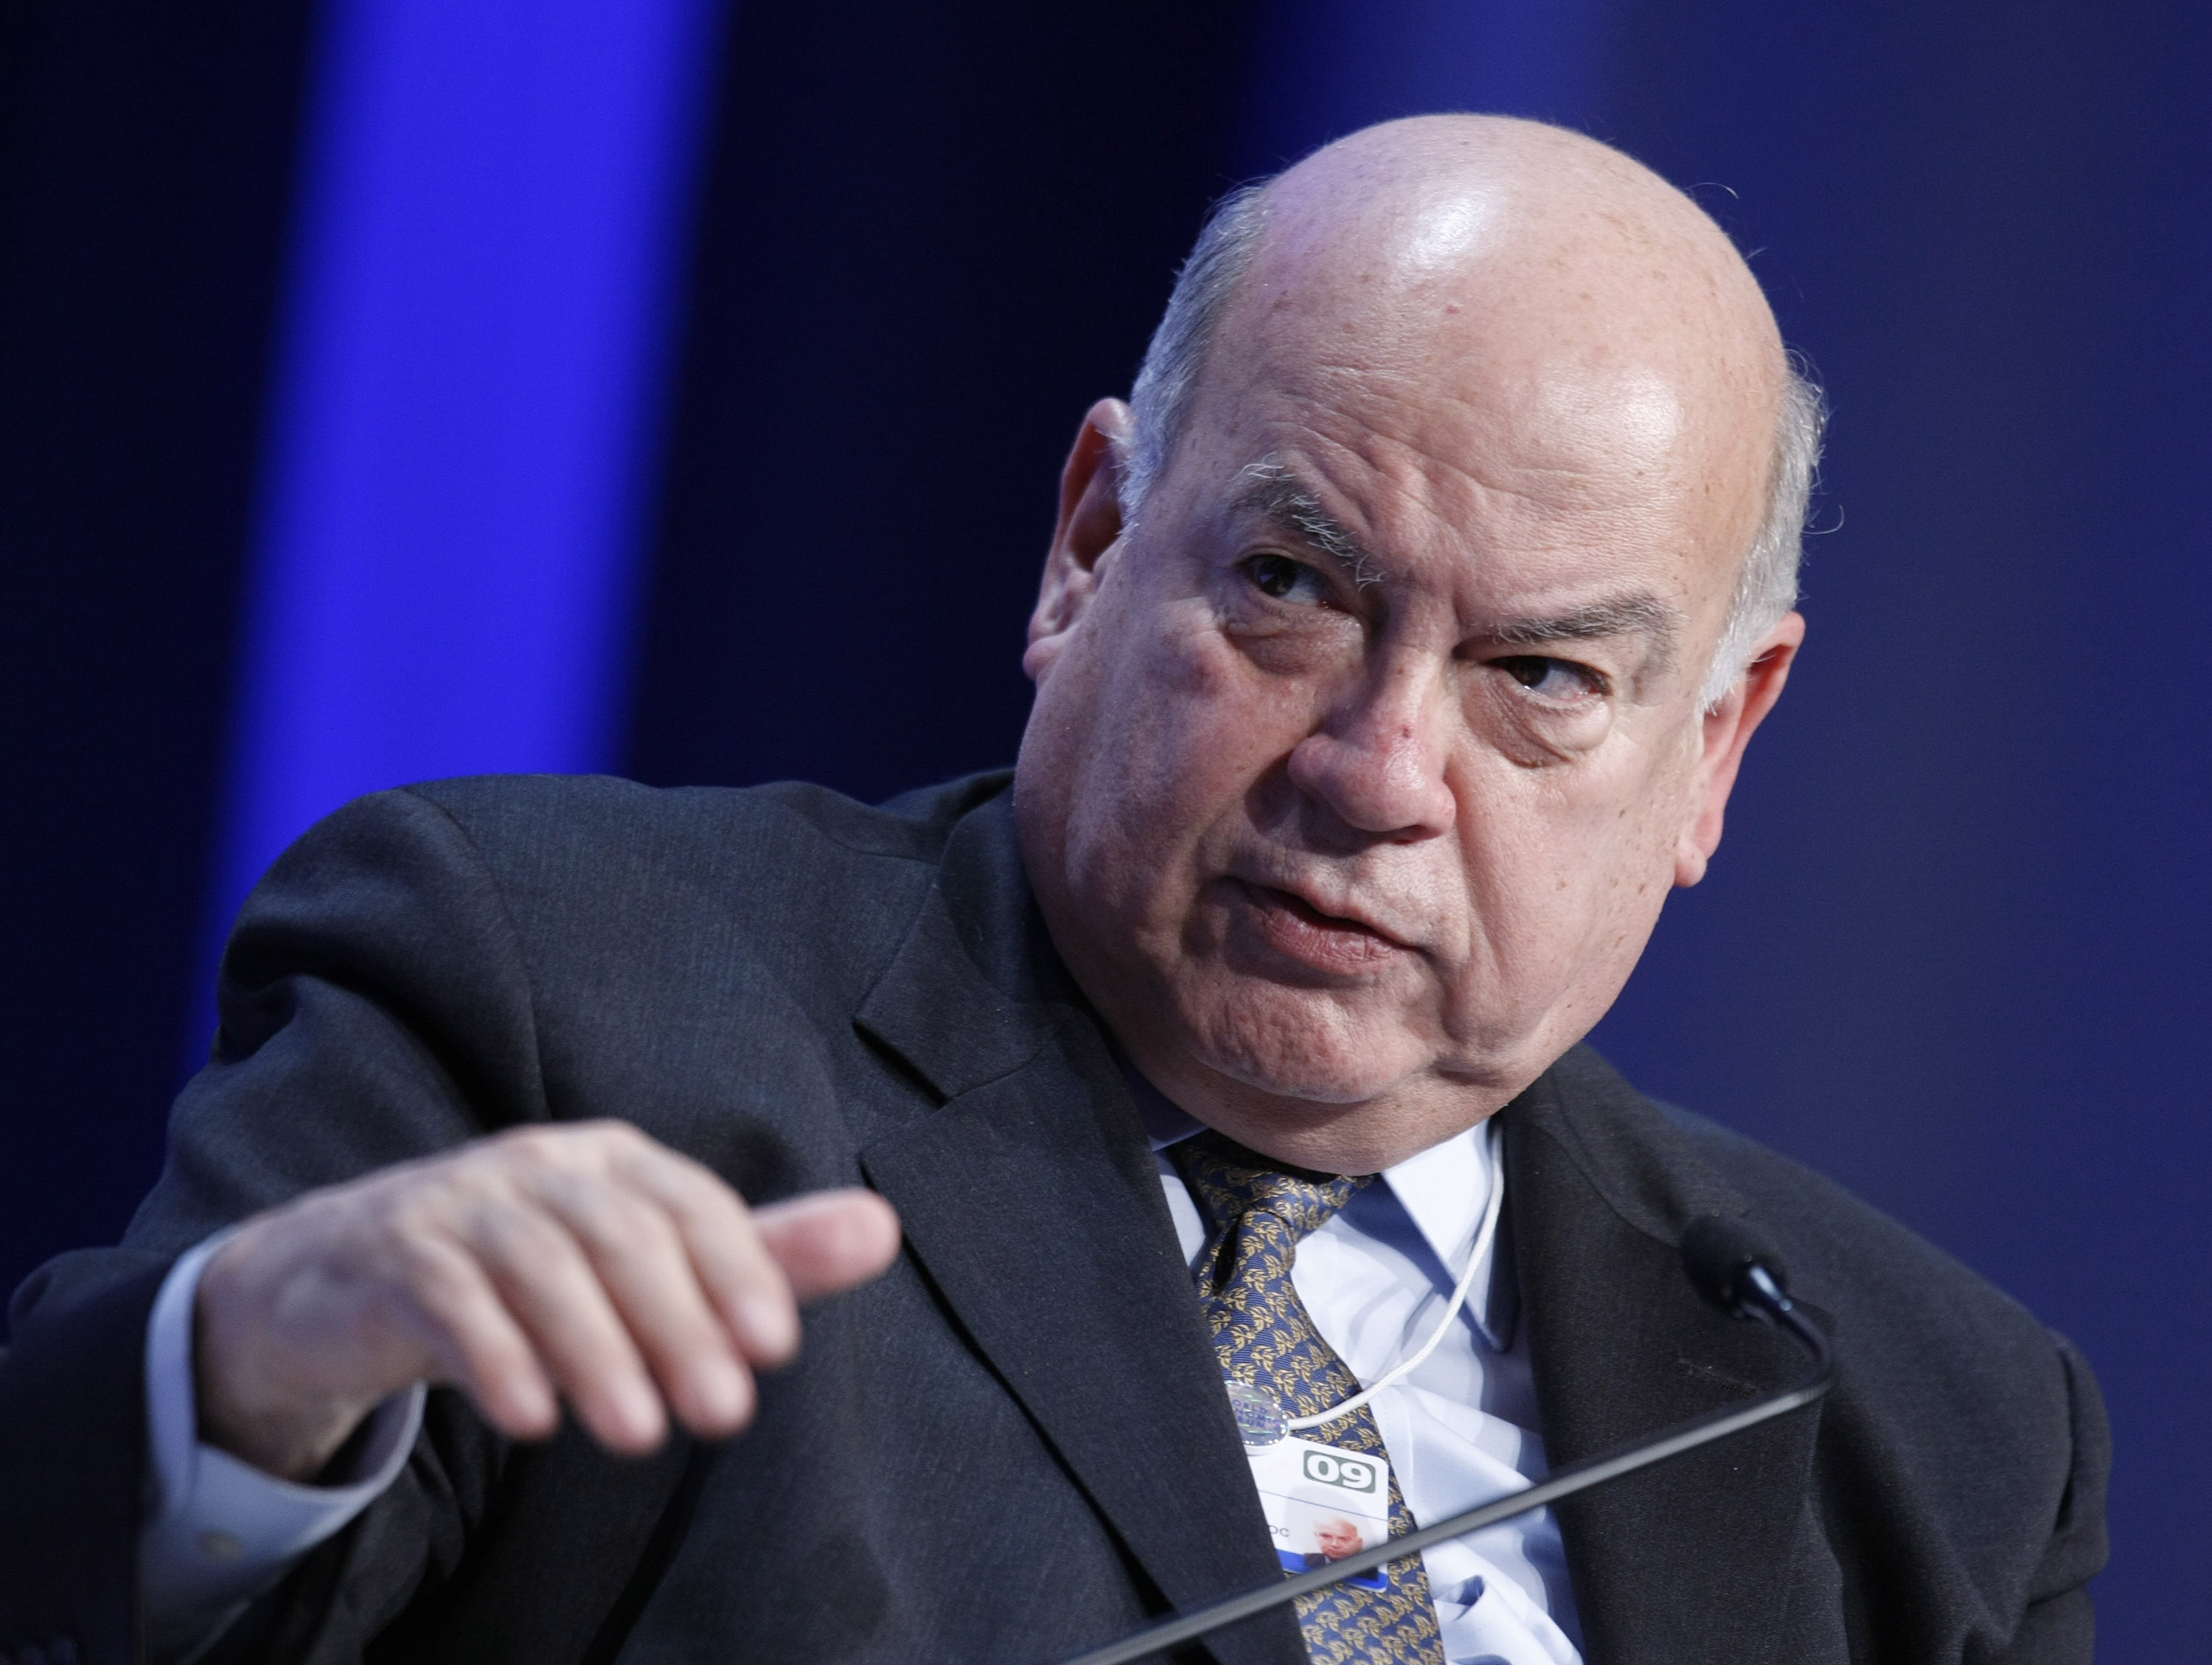 OAS Secretary General Insulza attend a session at the World Economic Forum in Davos